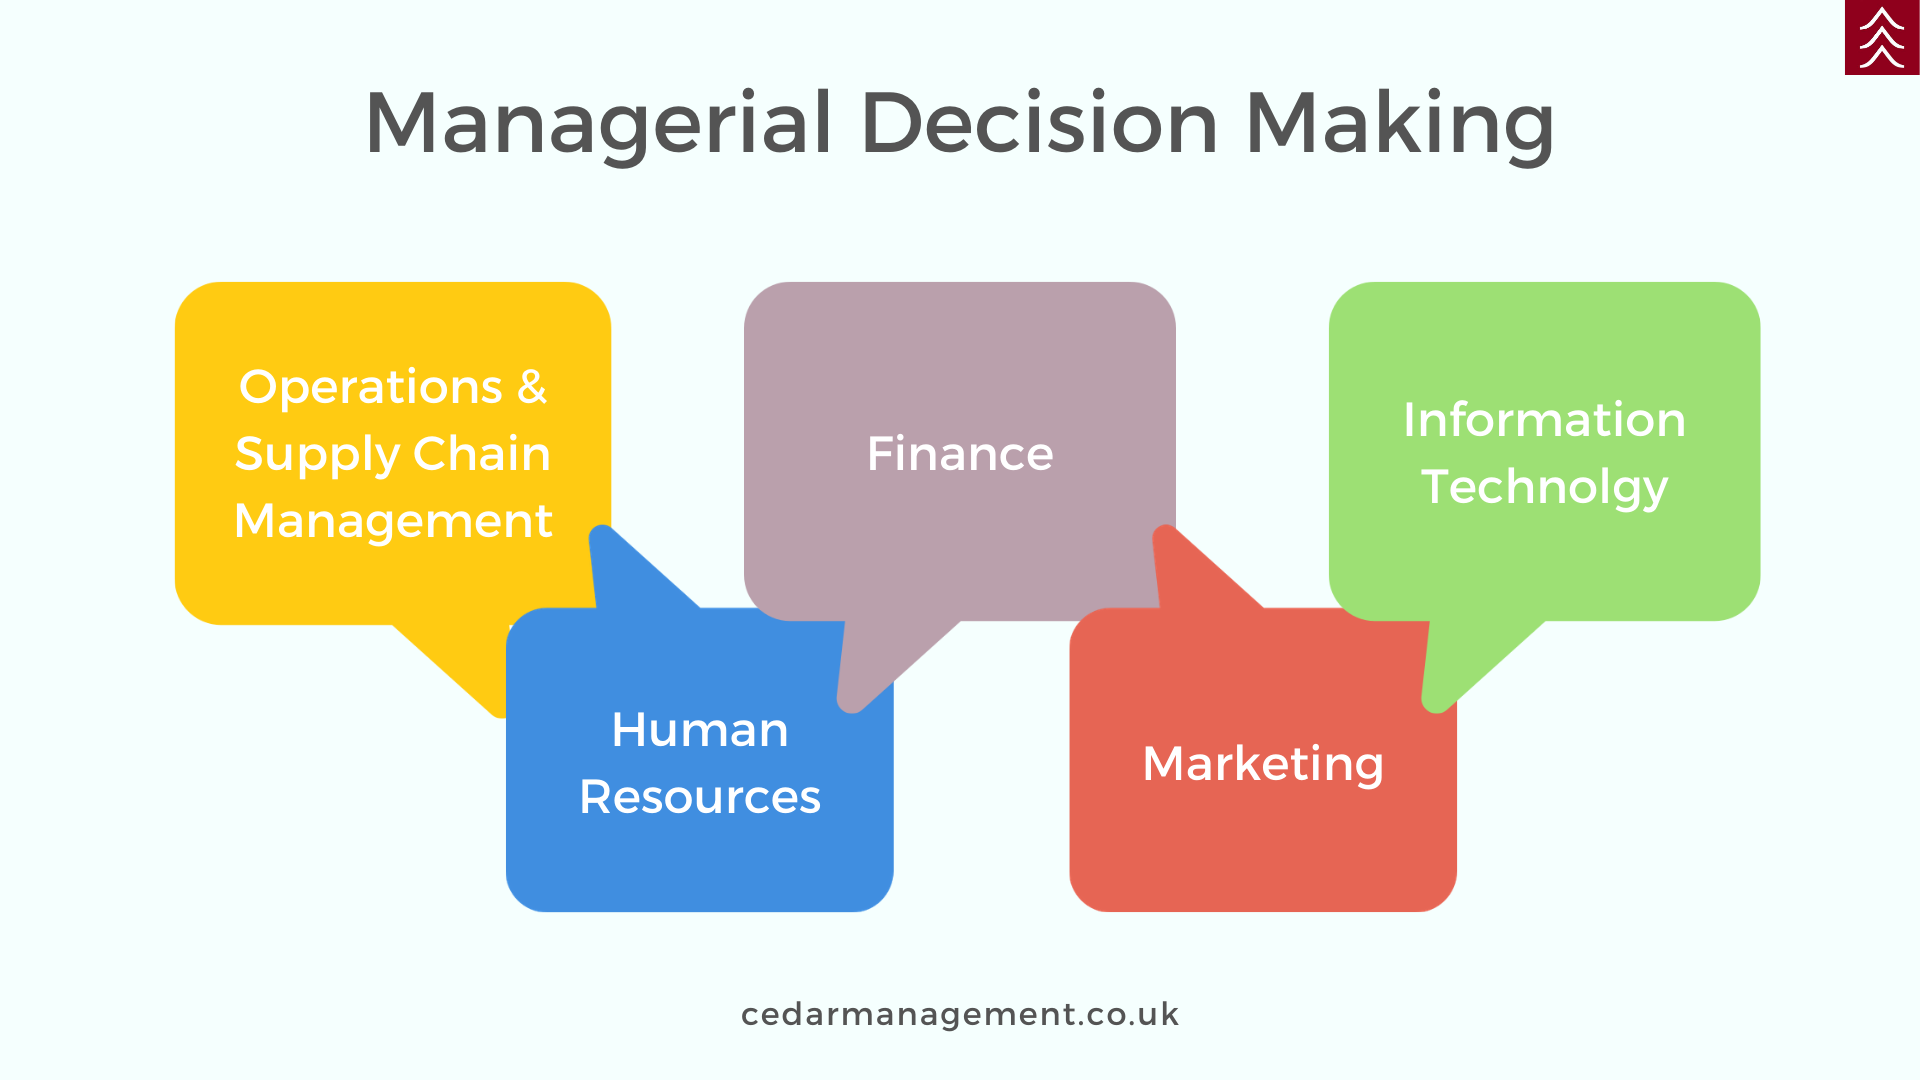 Dismissal: Important criteria in managerial decision-making